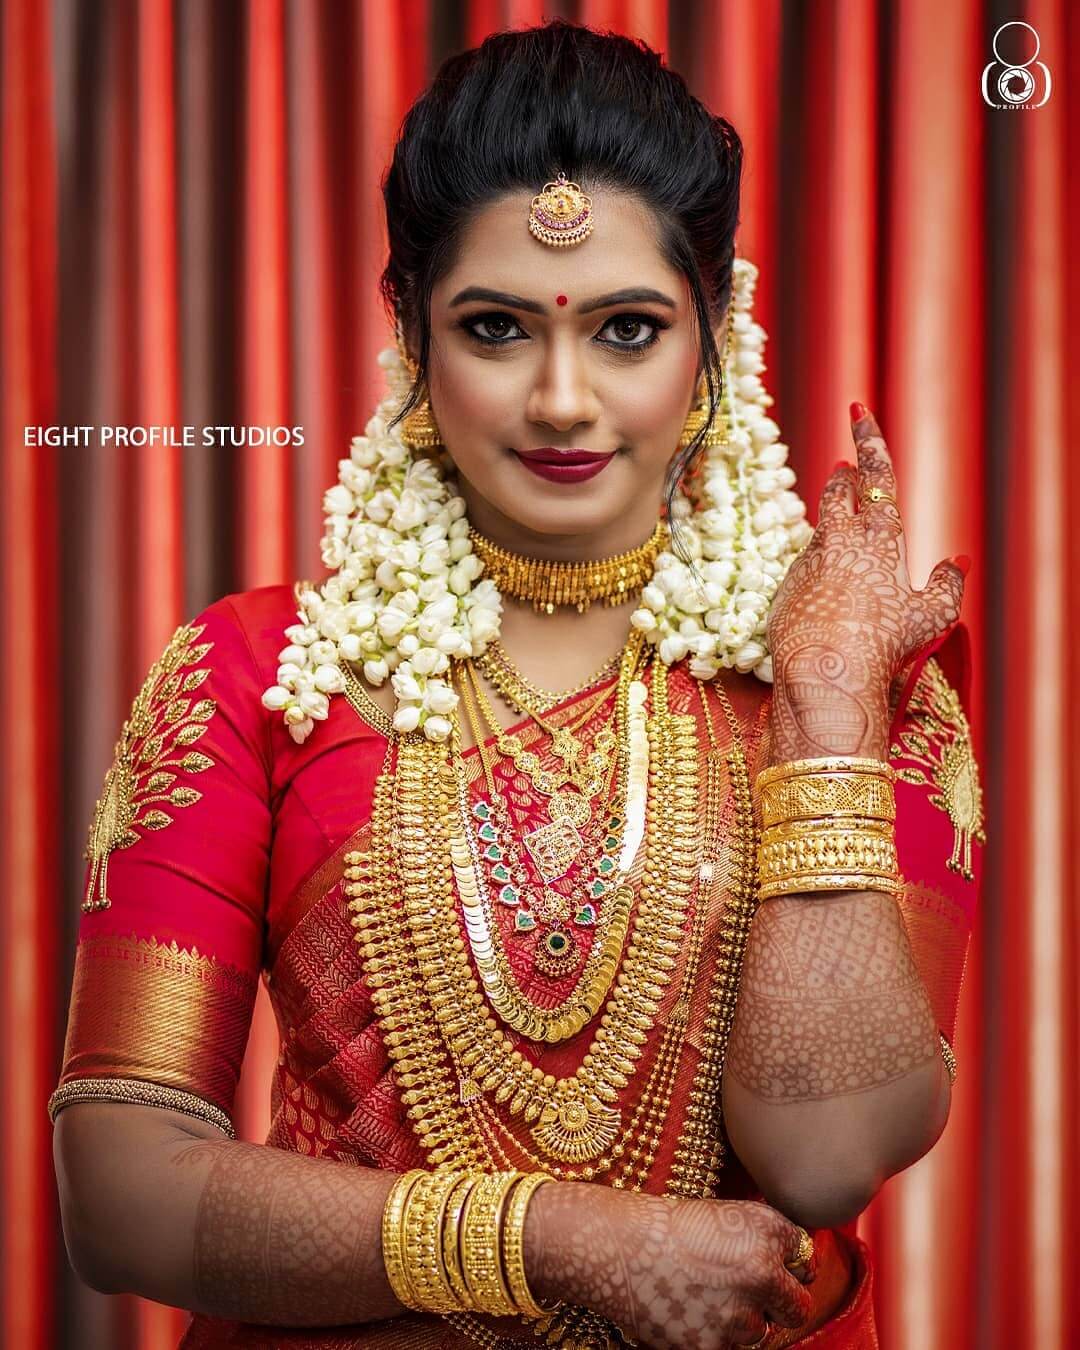 South Indian Bridal Jewellry Gold Jewellery With A Choker And Maang Tikka